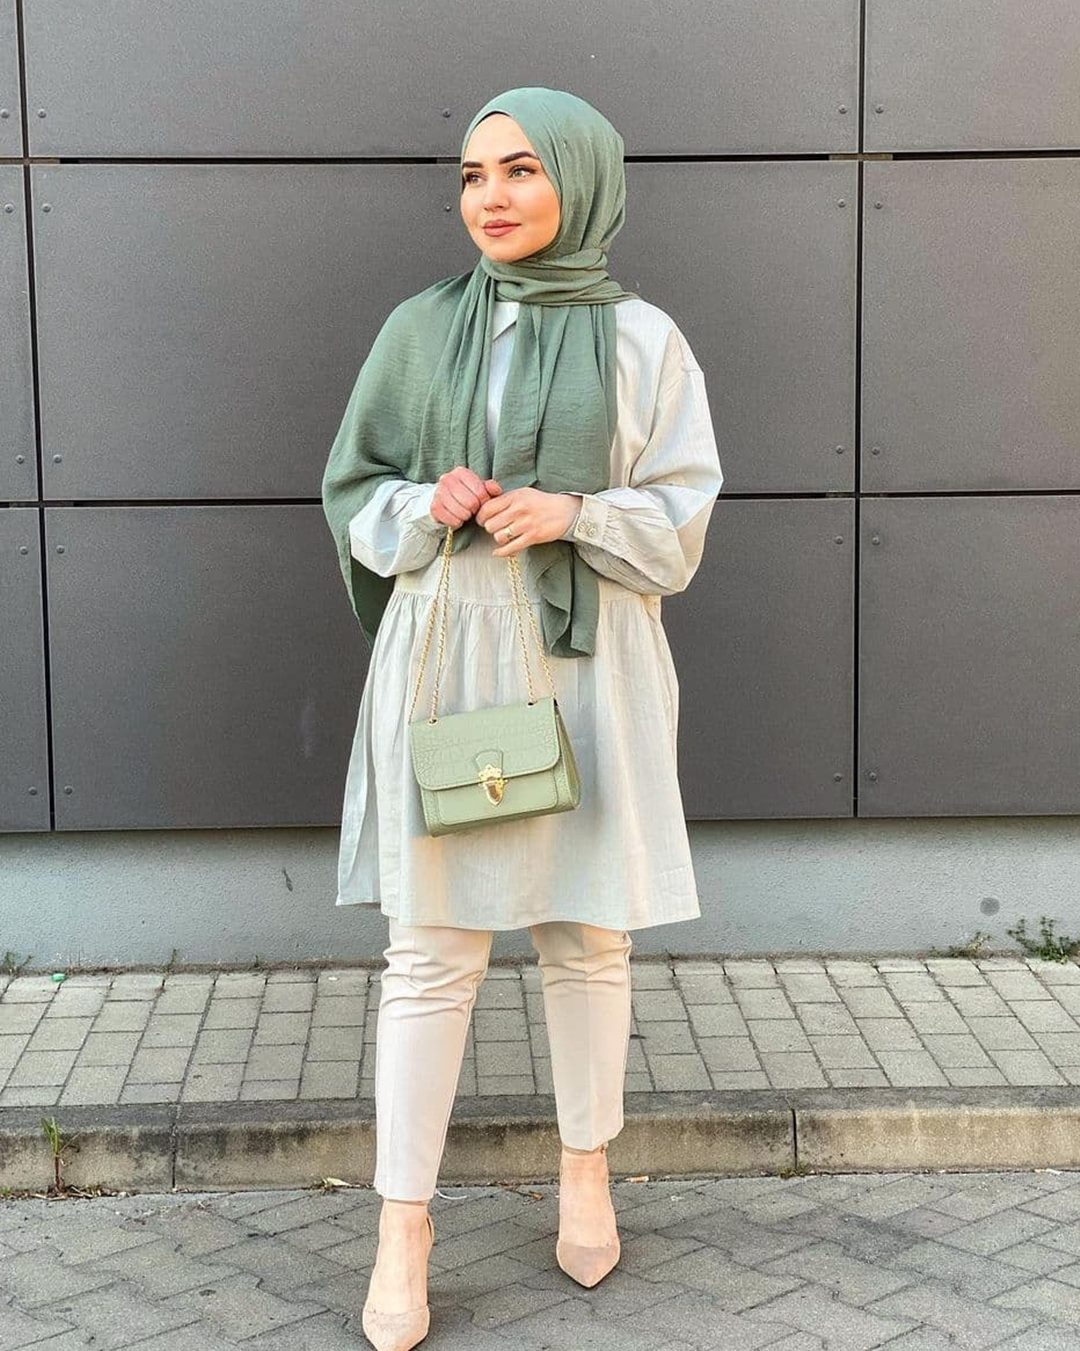 30 Hijabis Summer Everyday Outfit Ideas - Hijab Fashion Inspiration